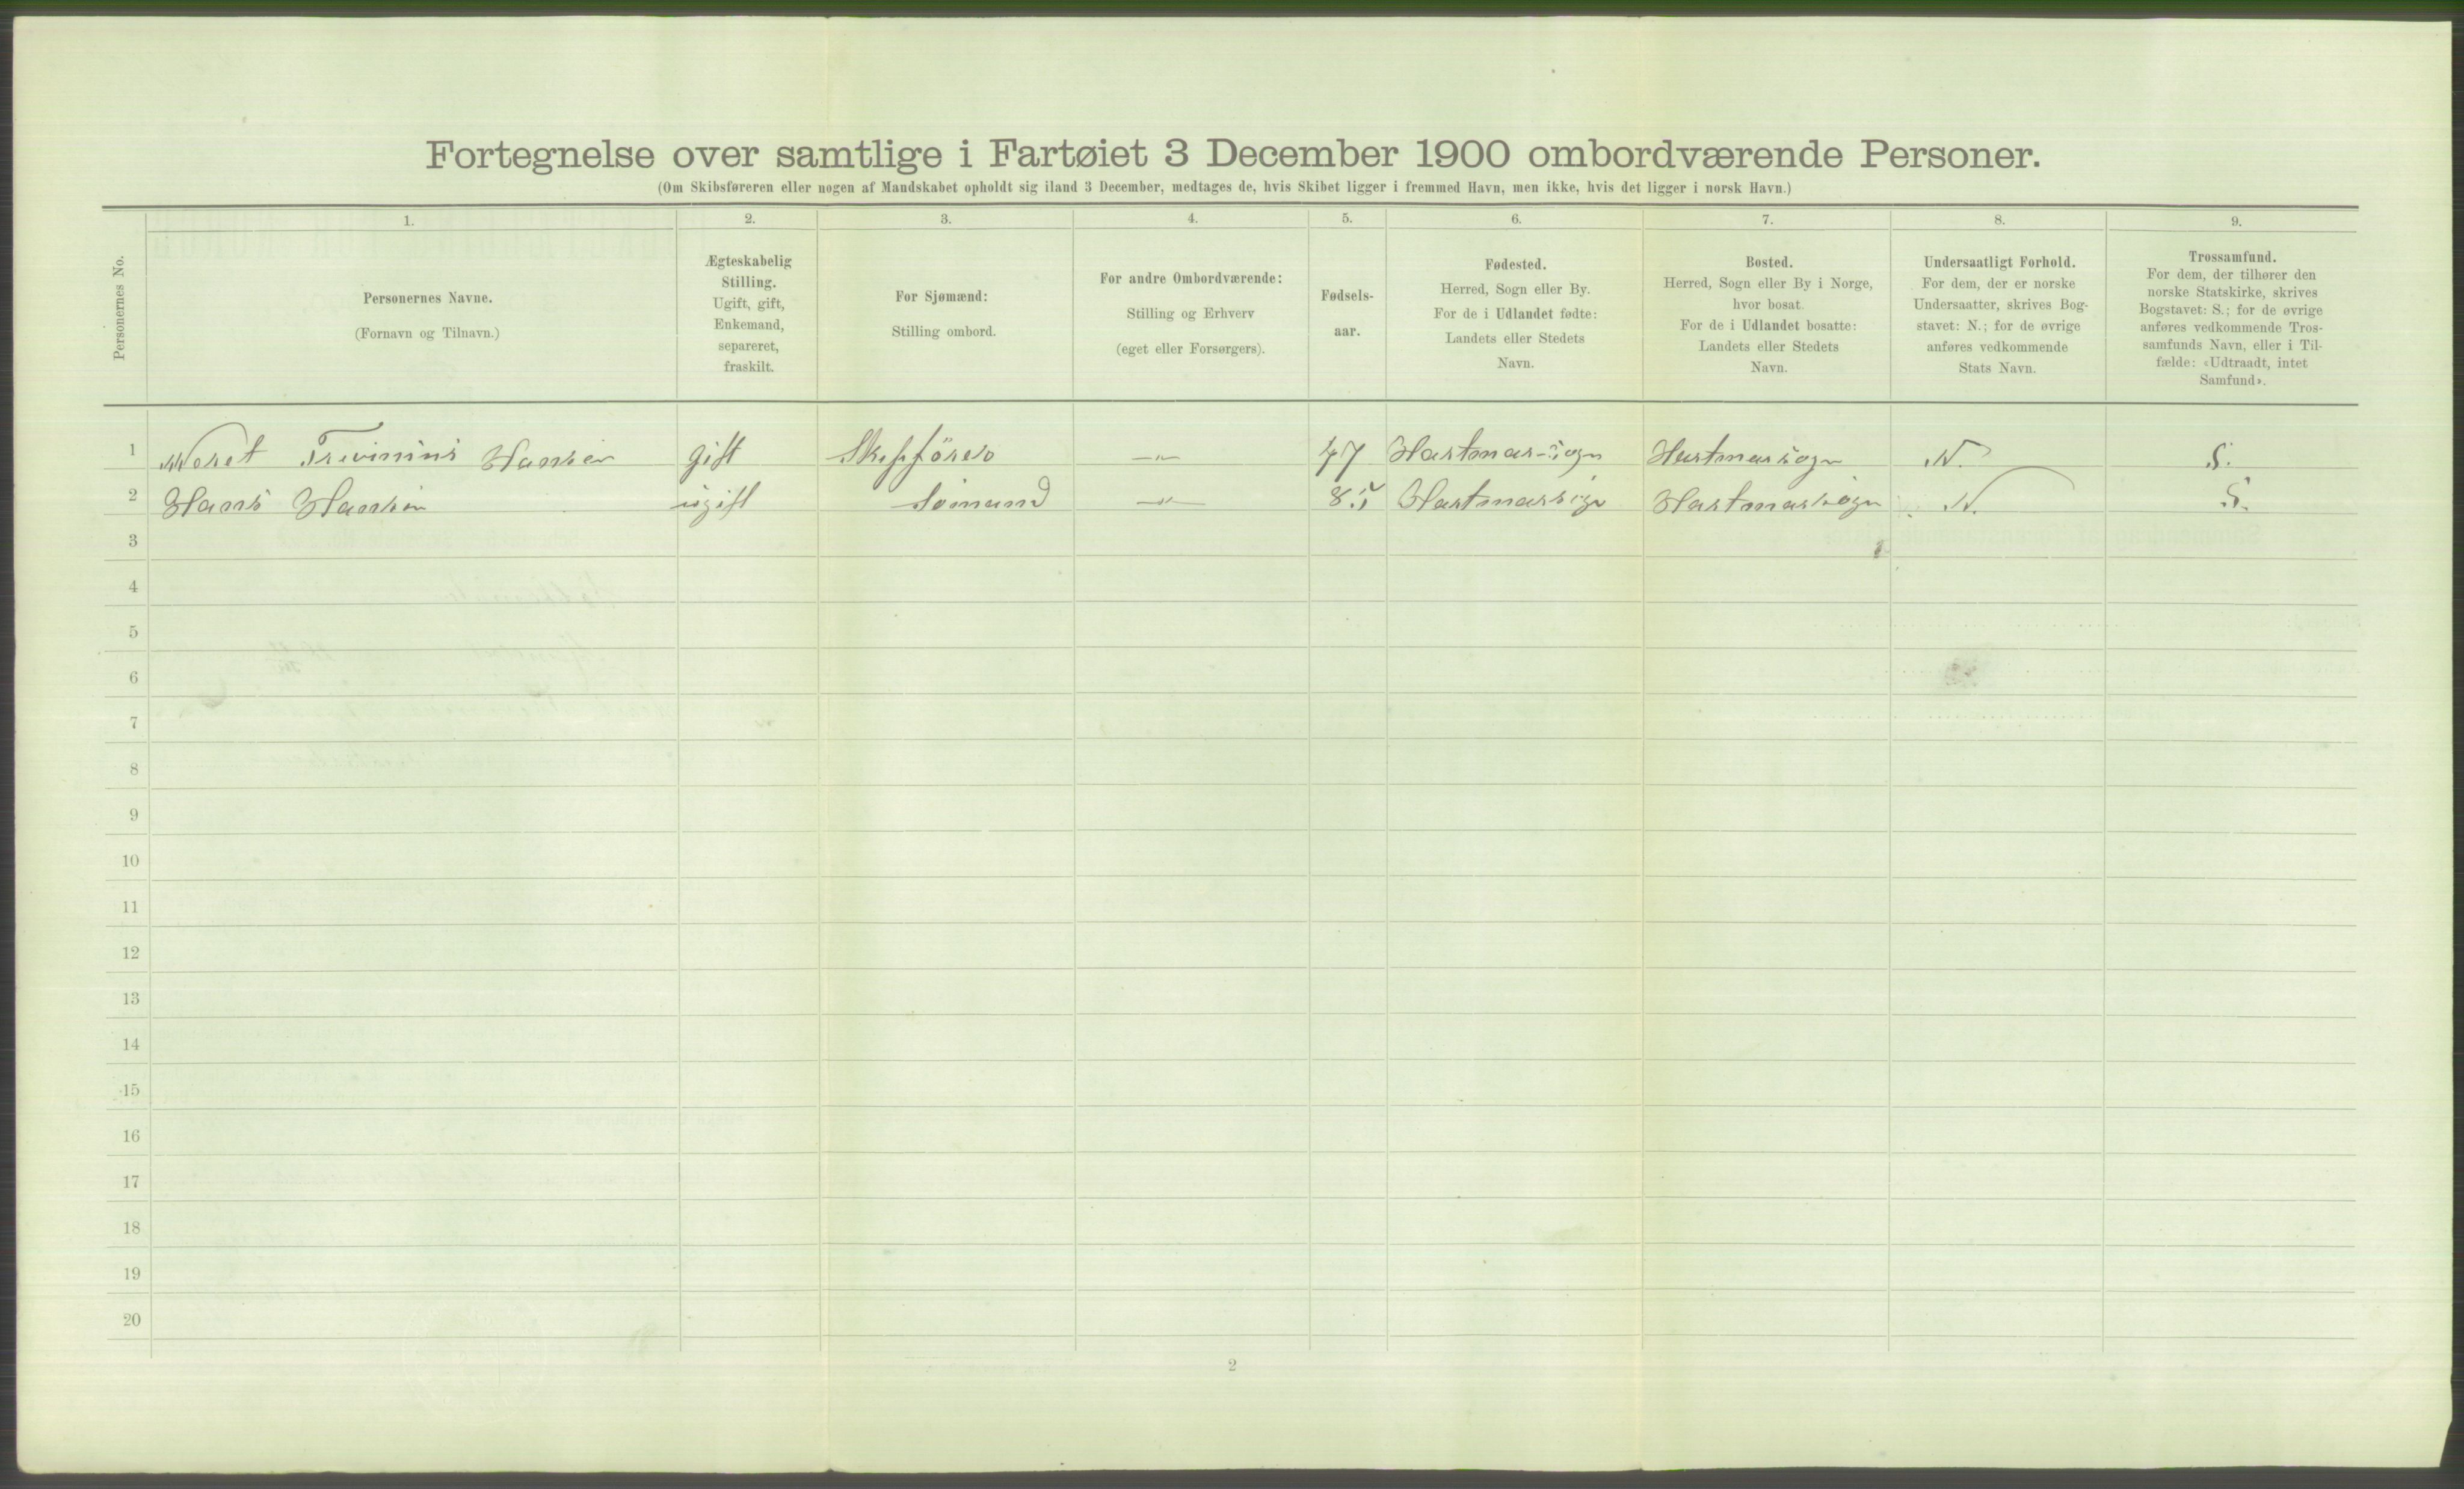 RA, 1900 Census - ship lists from ships in Norwegian harbours, harbours abroad and at sea, 1900, p. 832